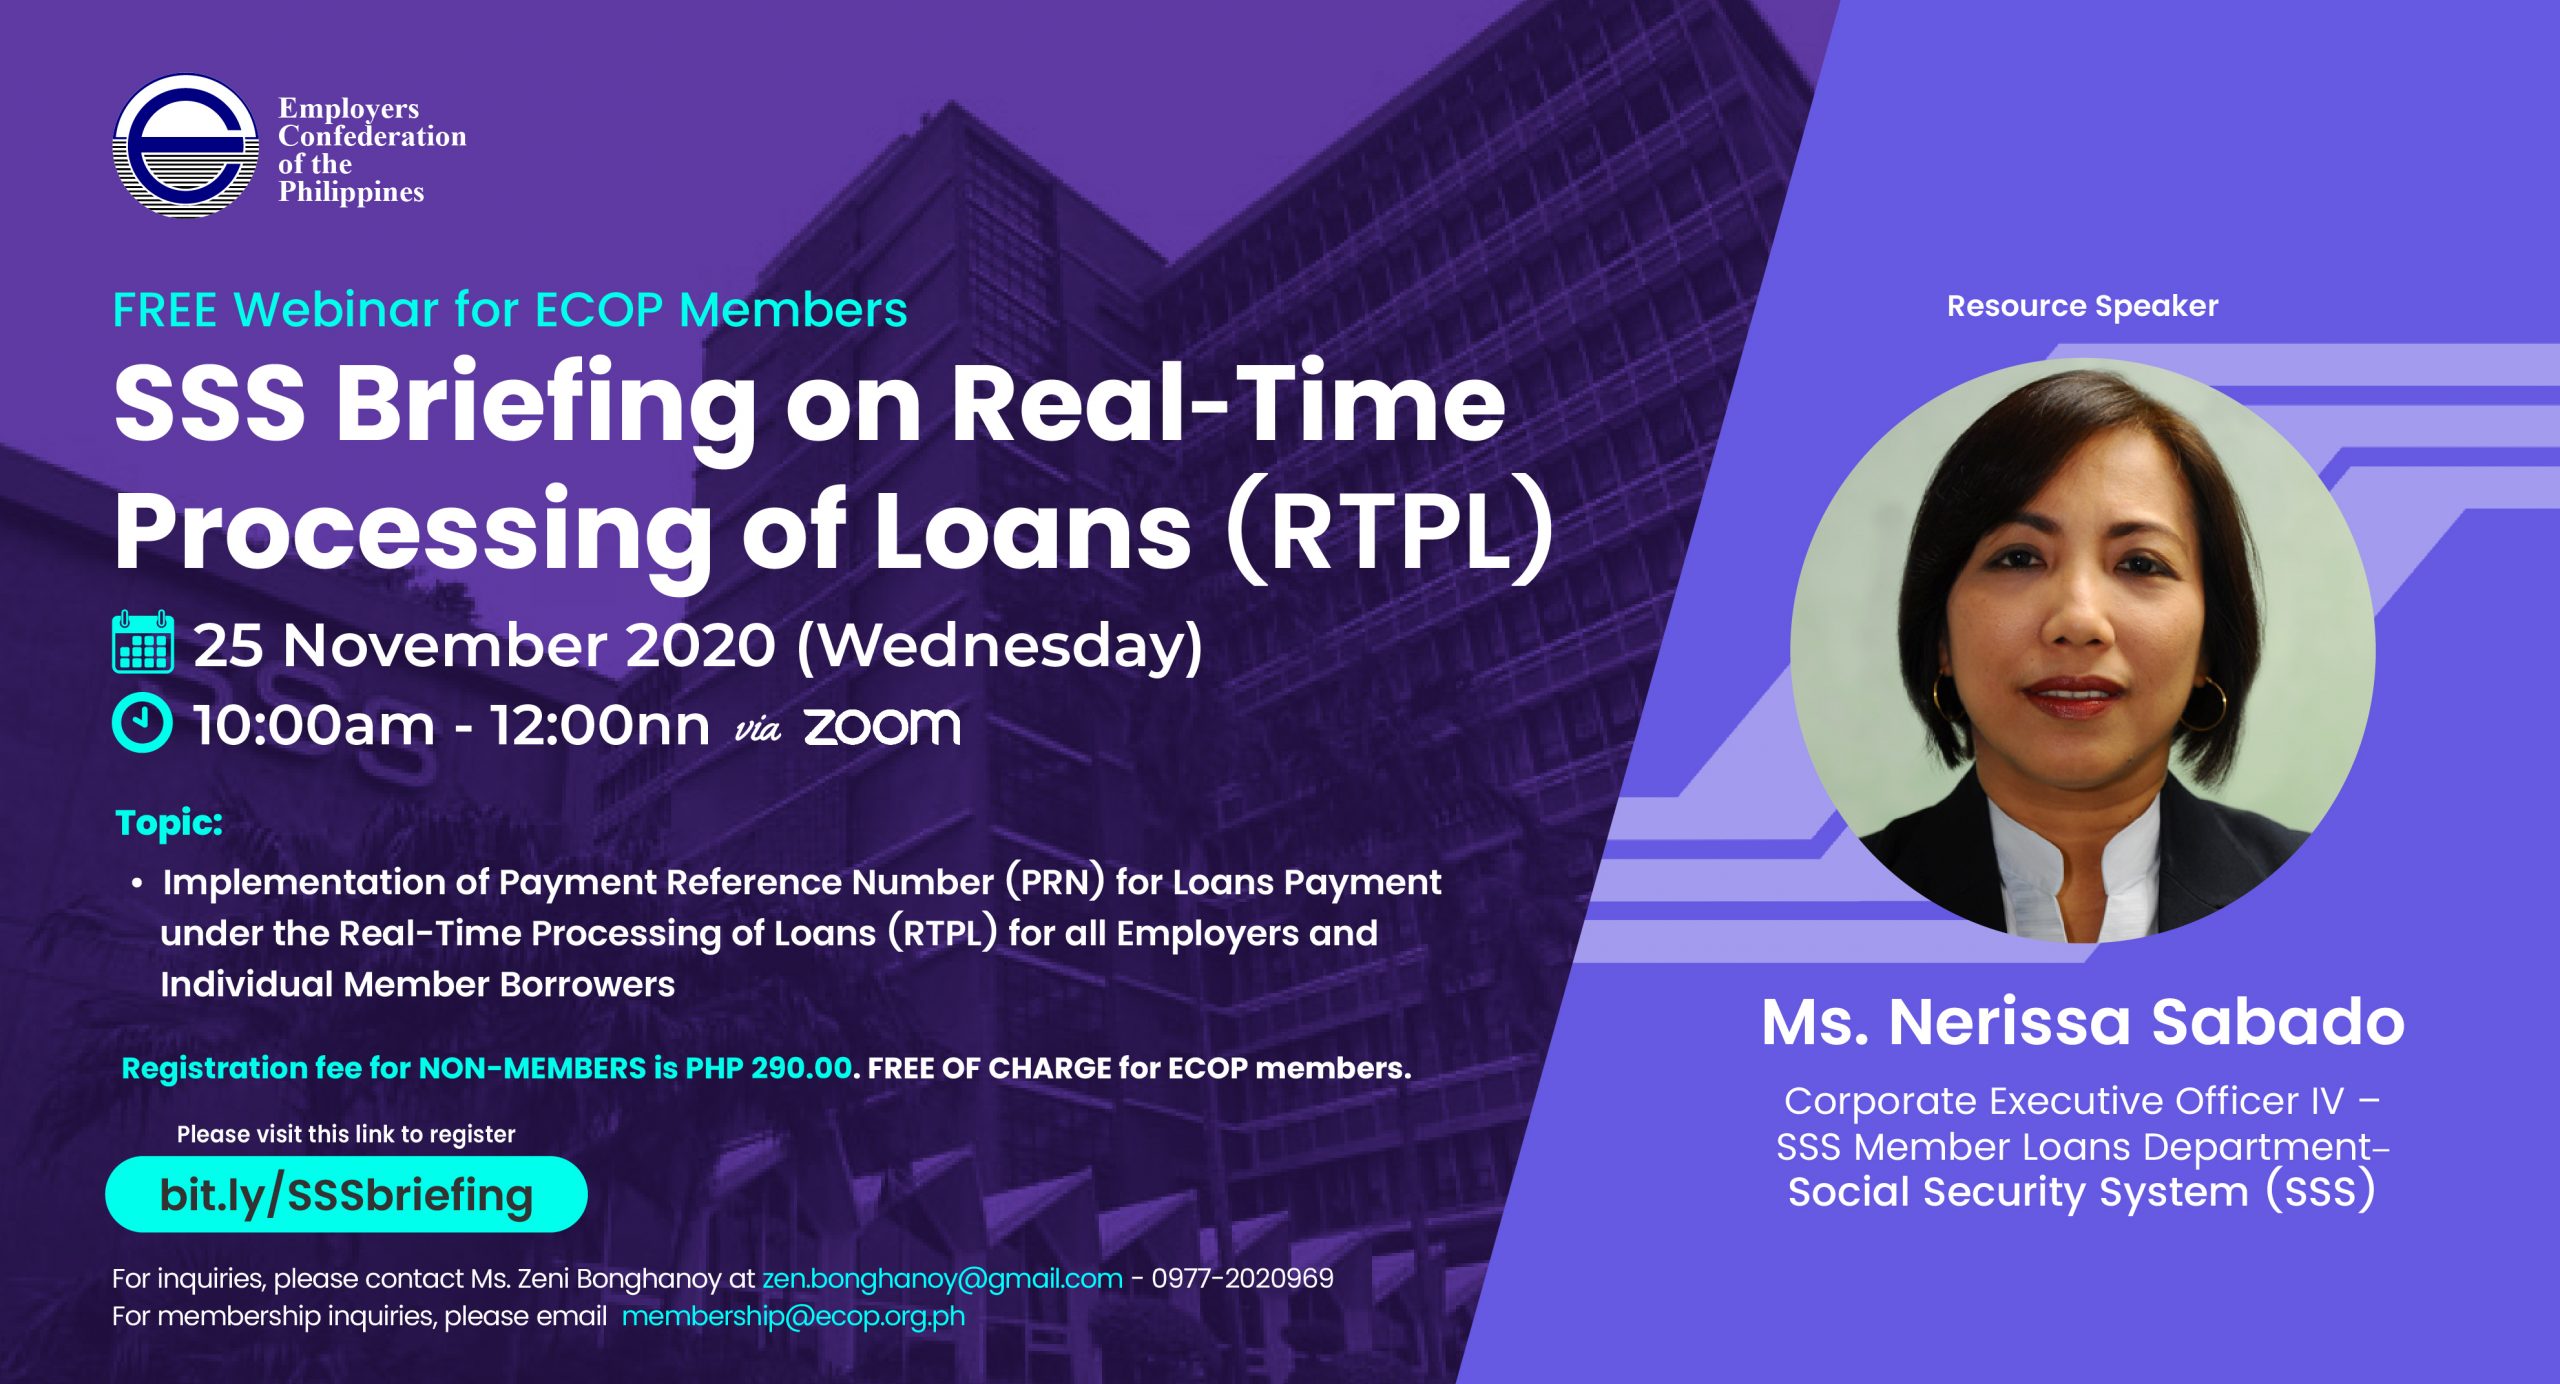 SSS Briefing on Real-Time Processing of Loans (RTPL)